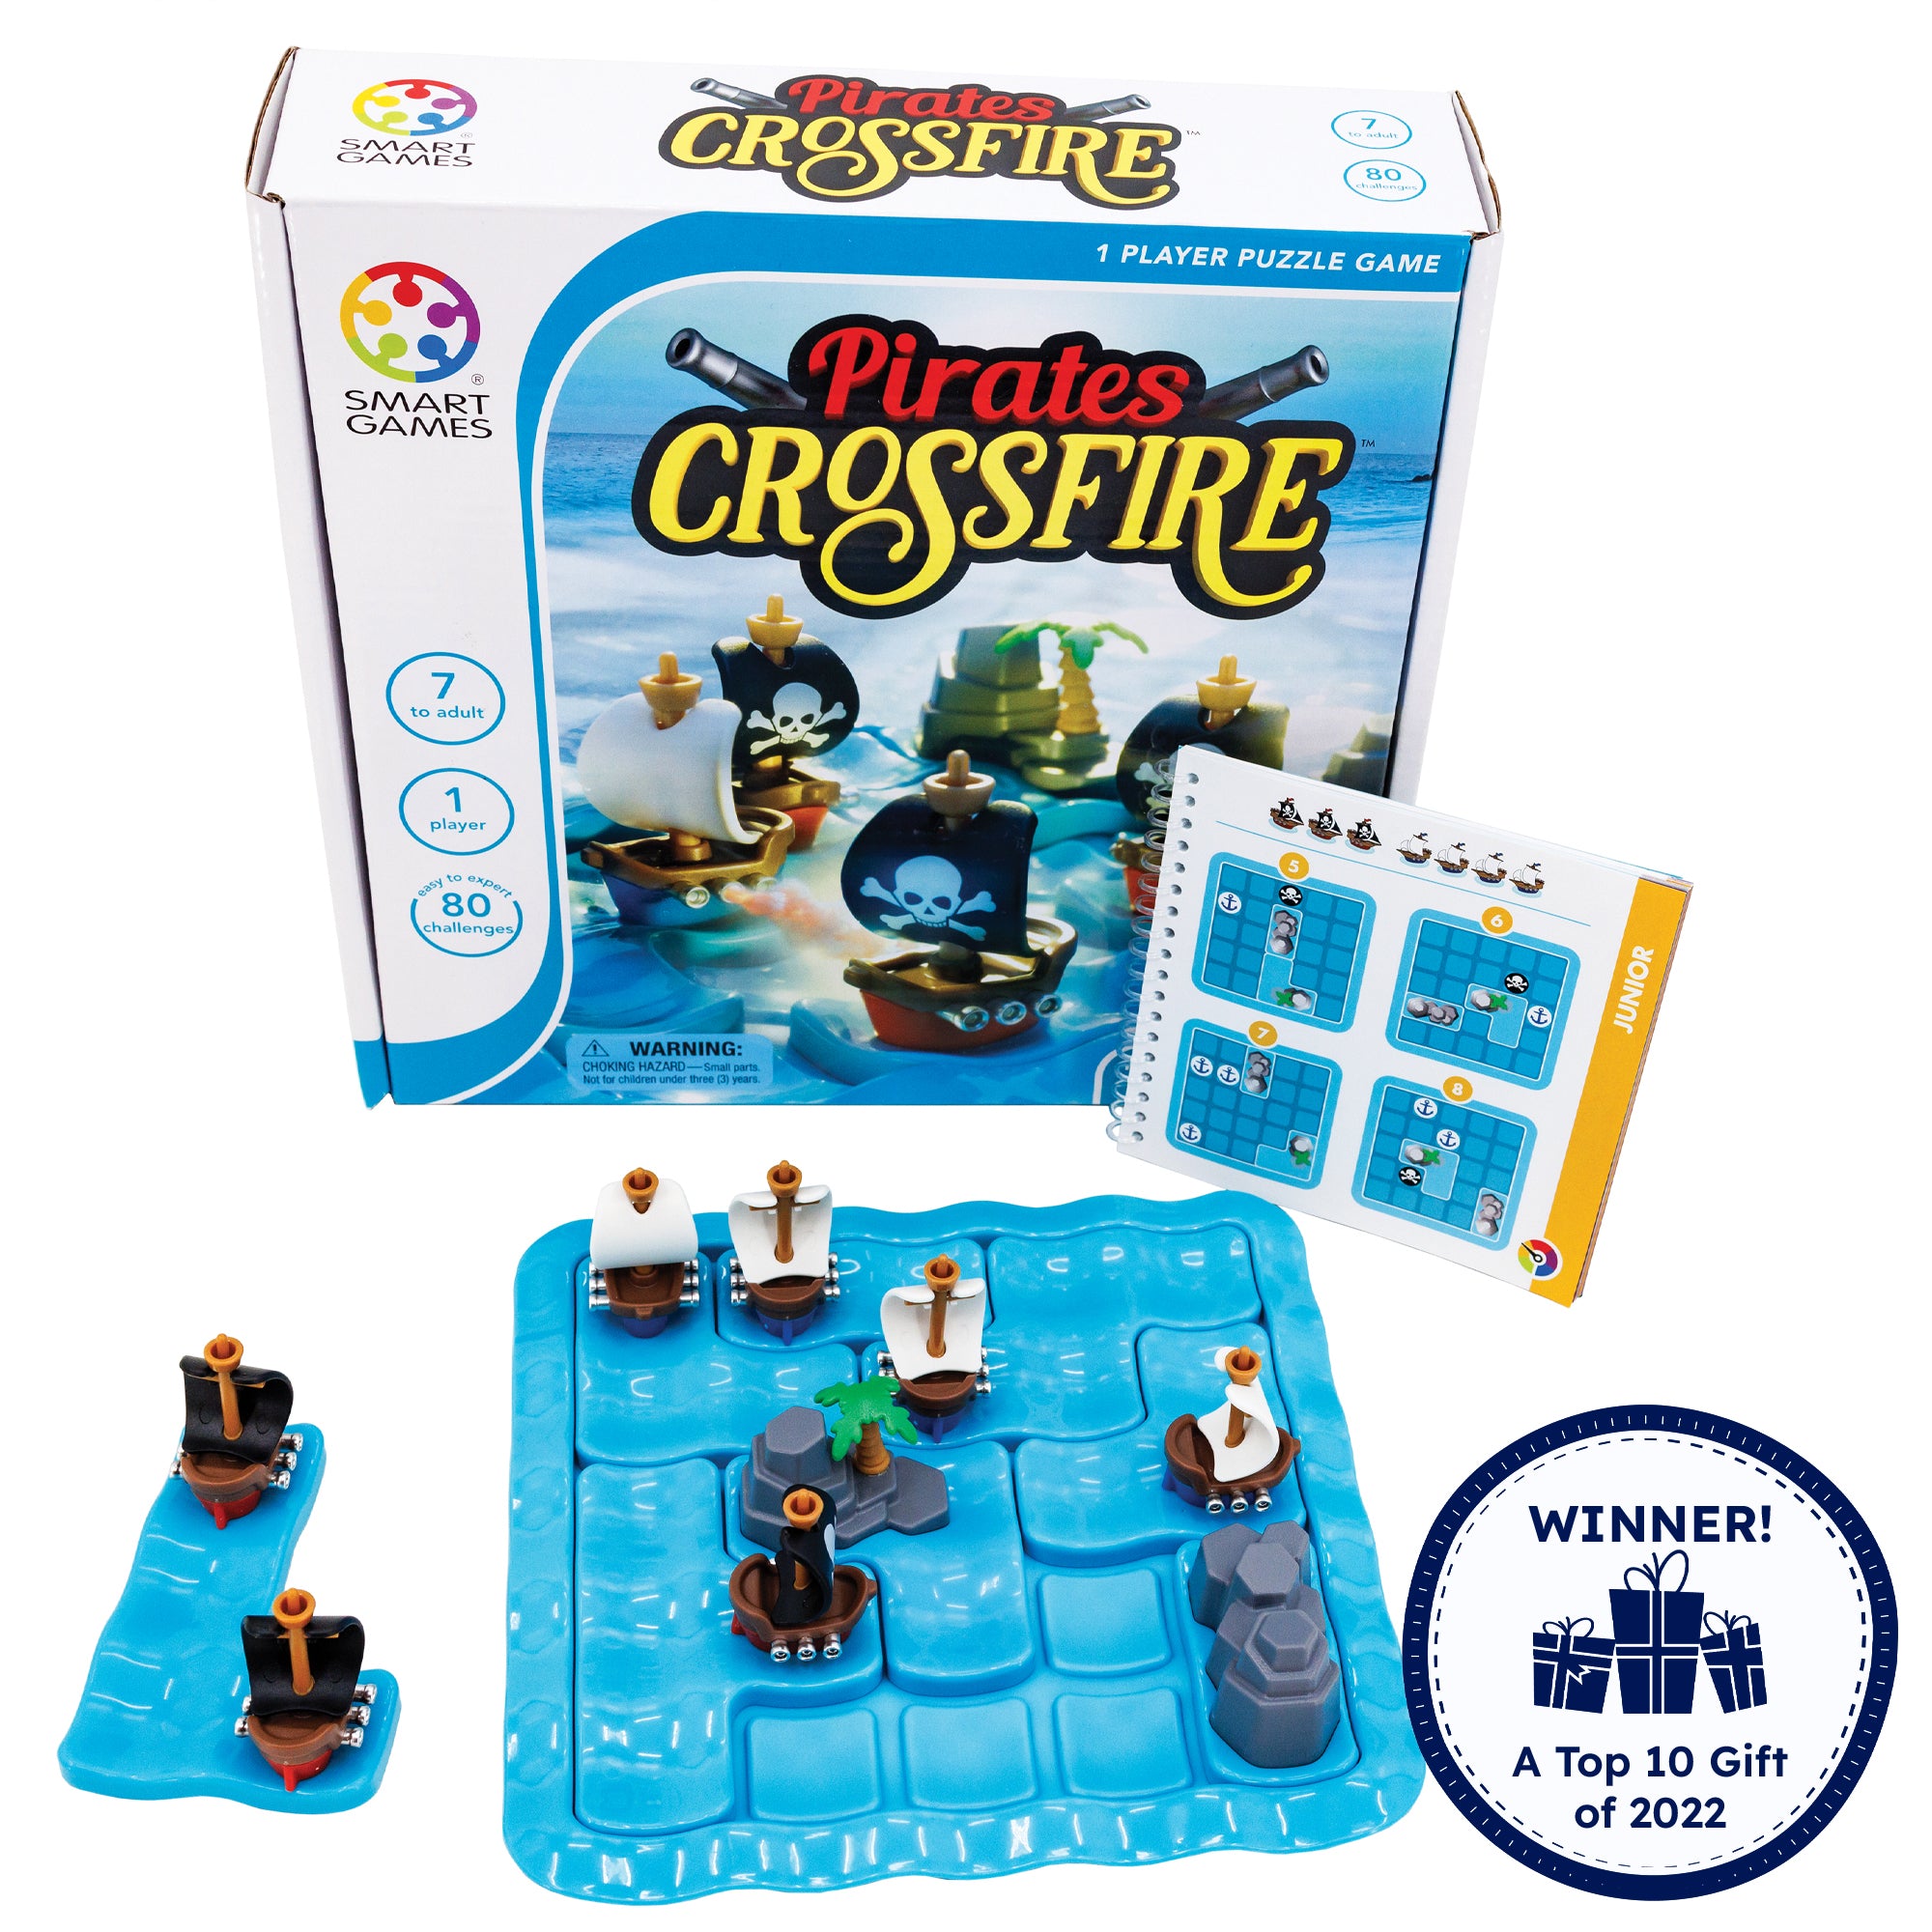 Pirates Crossfire game. The gameboard is blue and wavy in a square shape with rounded corners. There are 4 pieces set in place on the board; one white-sailed ship, one black-sailed ship, and 2 rock pieces. There are 4 ship pieces off the board to the top. On the left is the instruction booklet open to a junior puzzle. The game box in the background shows the game with pieces in play. In the bottom left is a badge reading “Winner! A top 10 gift of 2022.”